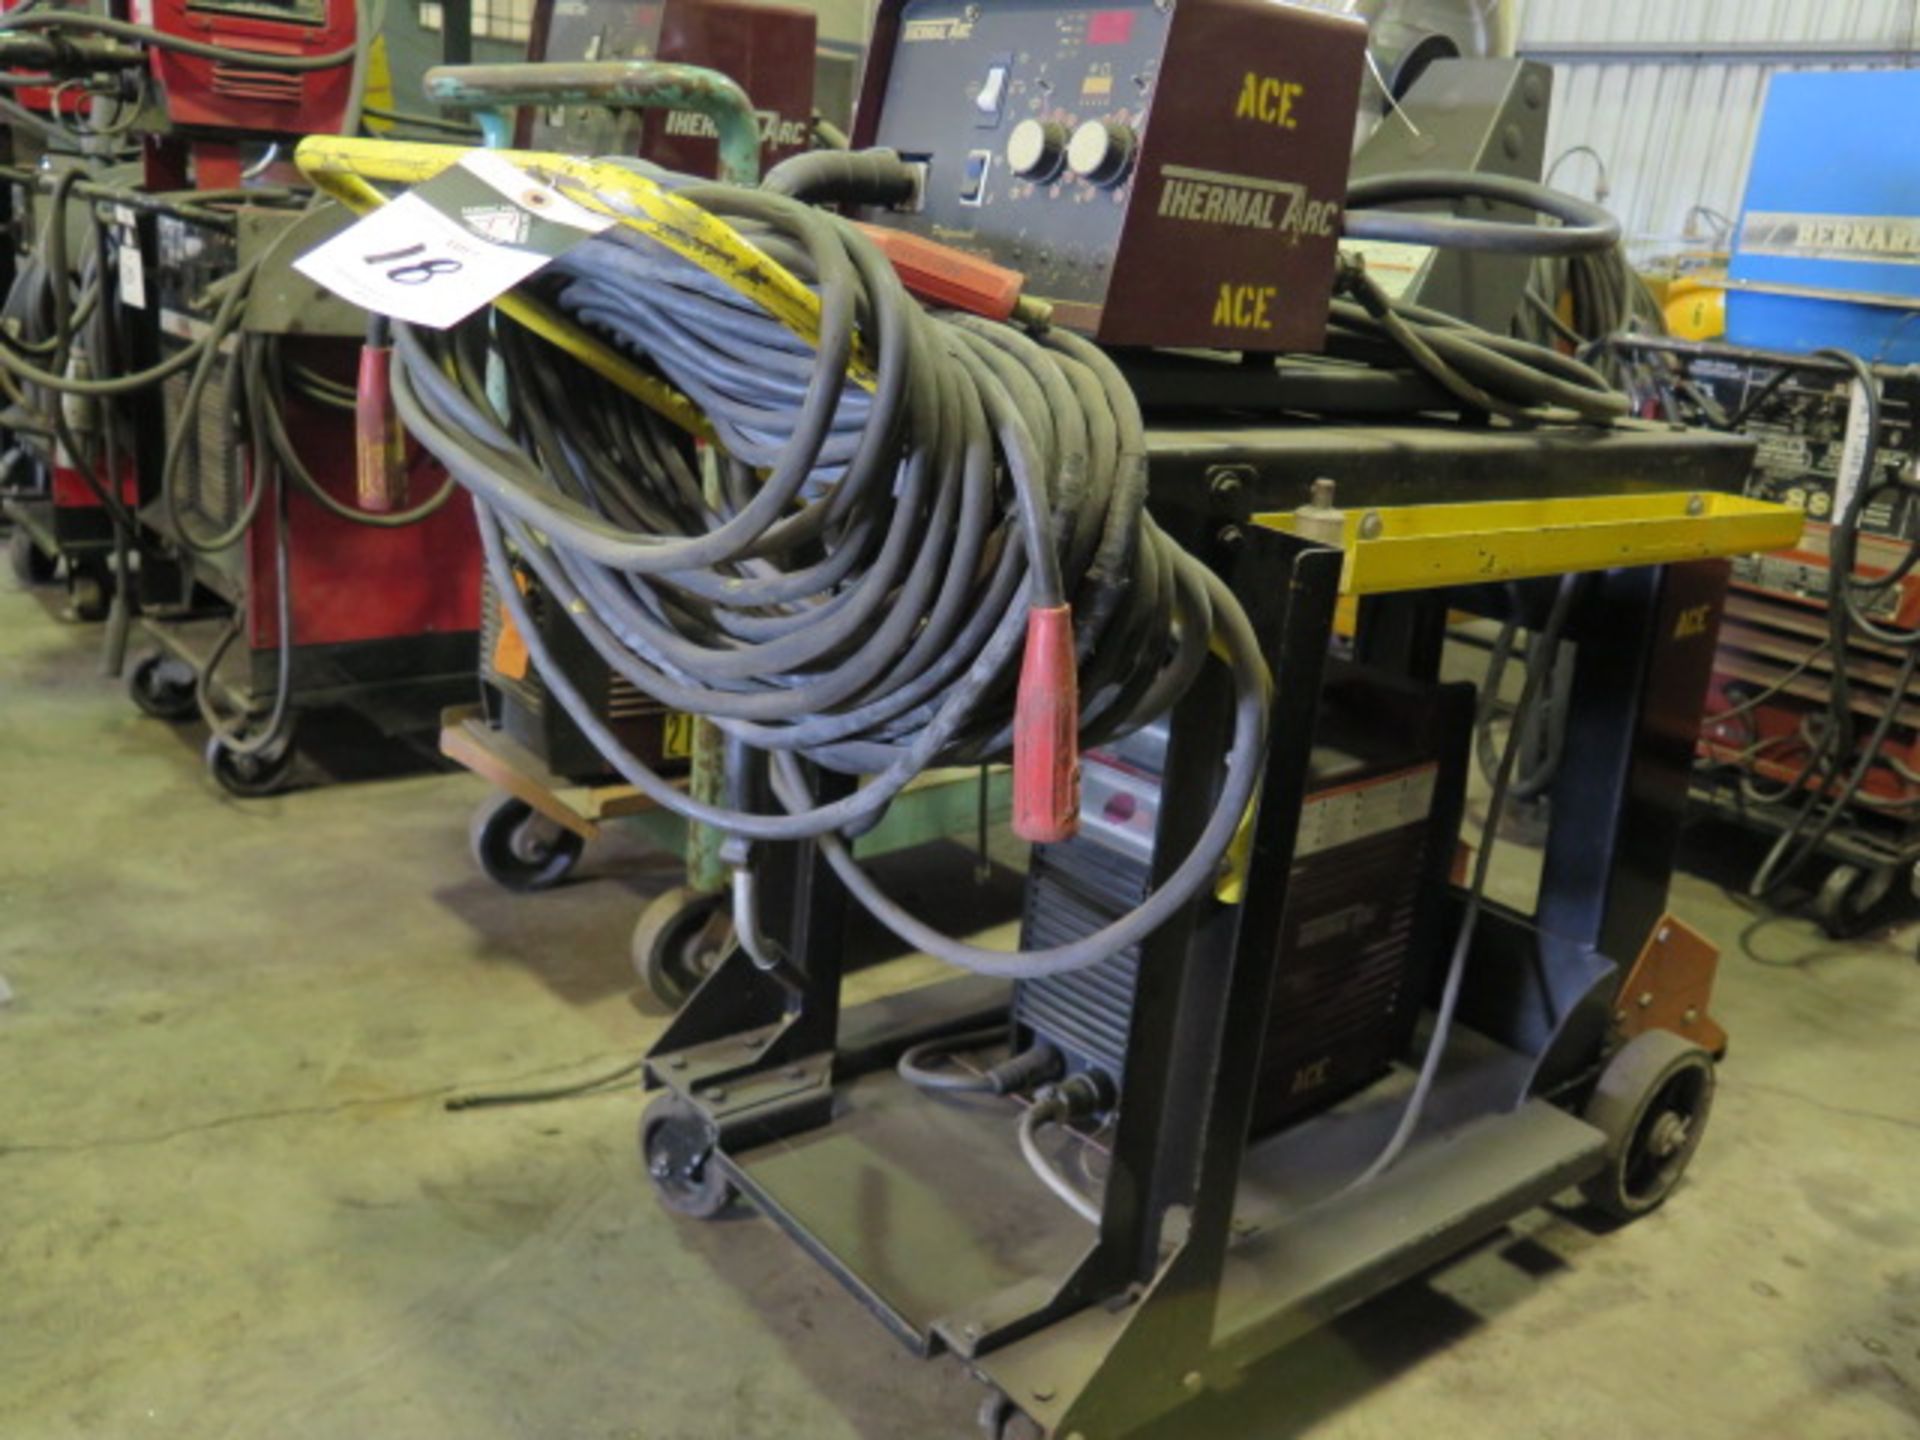 Thermal Arc 400MST Arc Welding Power Source w/ VA2000 Wire Feed (SOLD AS-IS - NO WARRANTY) - Image 2 of 8